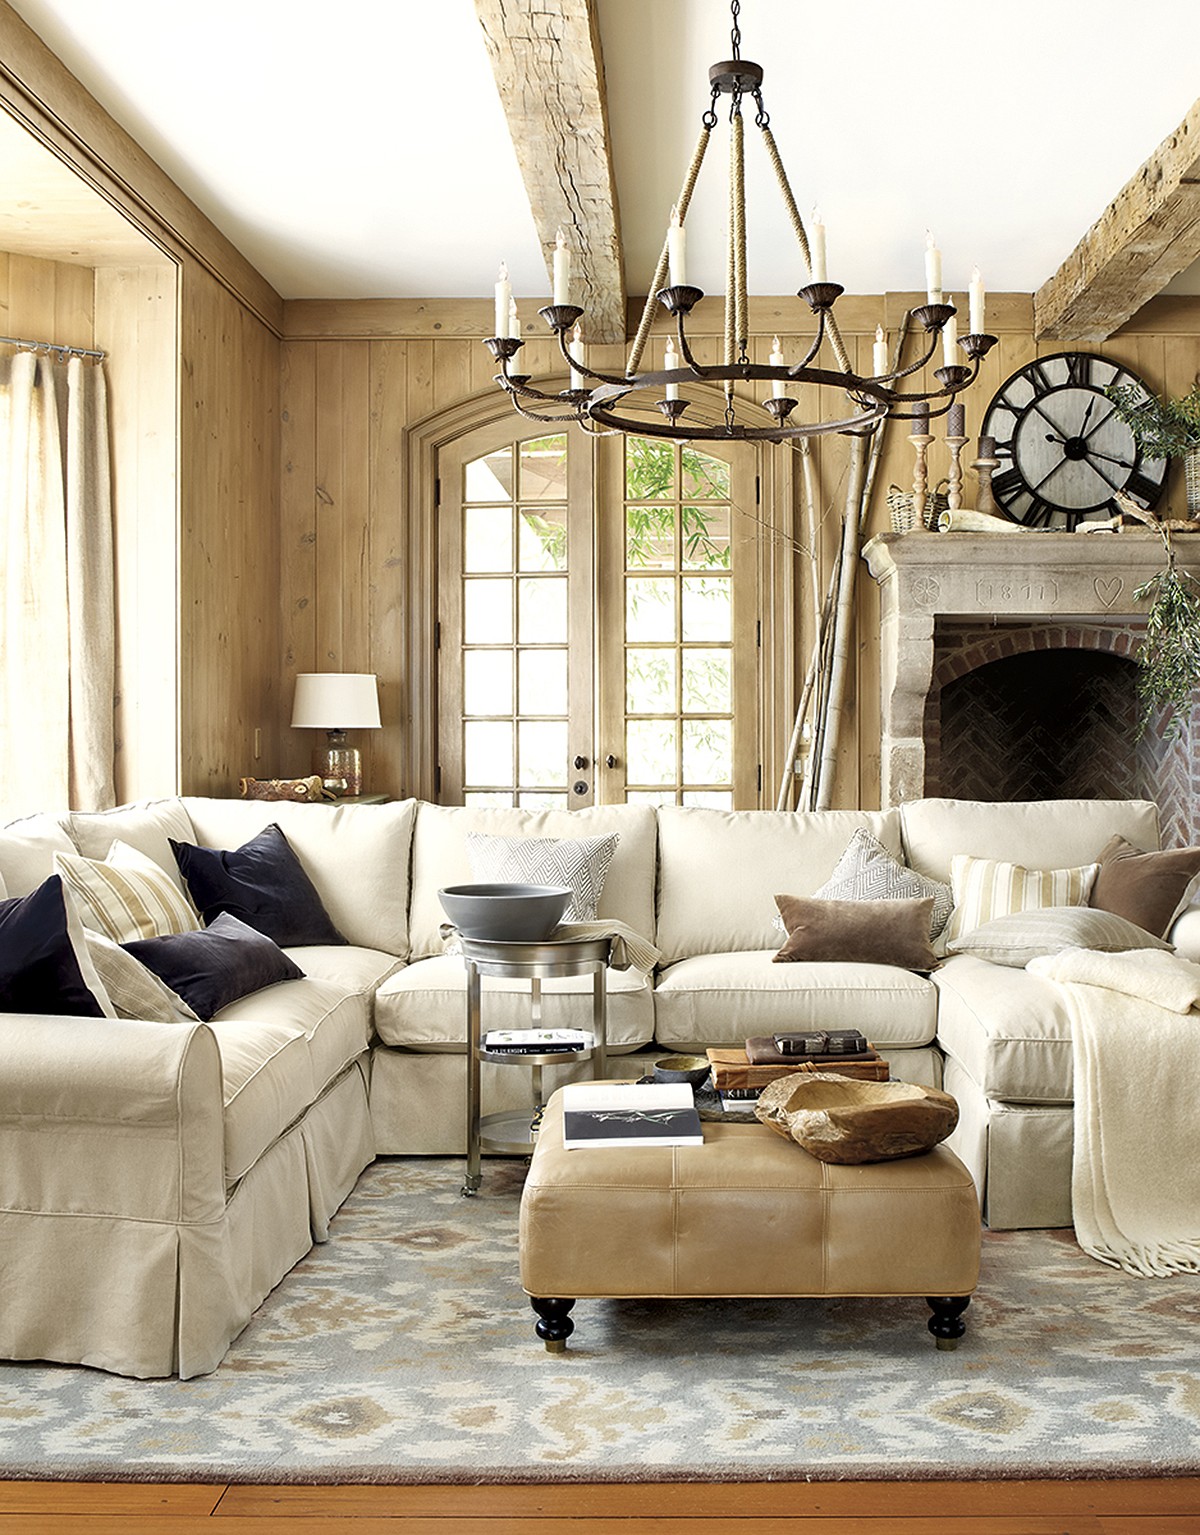 Cozy Living Room Decor: 10 Tips For A Warm And Inviting Space